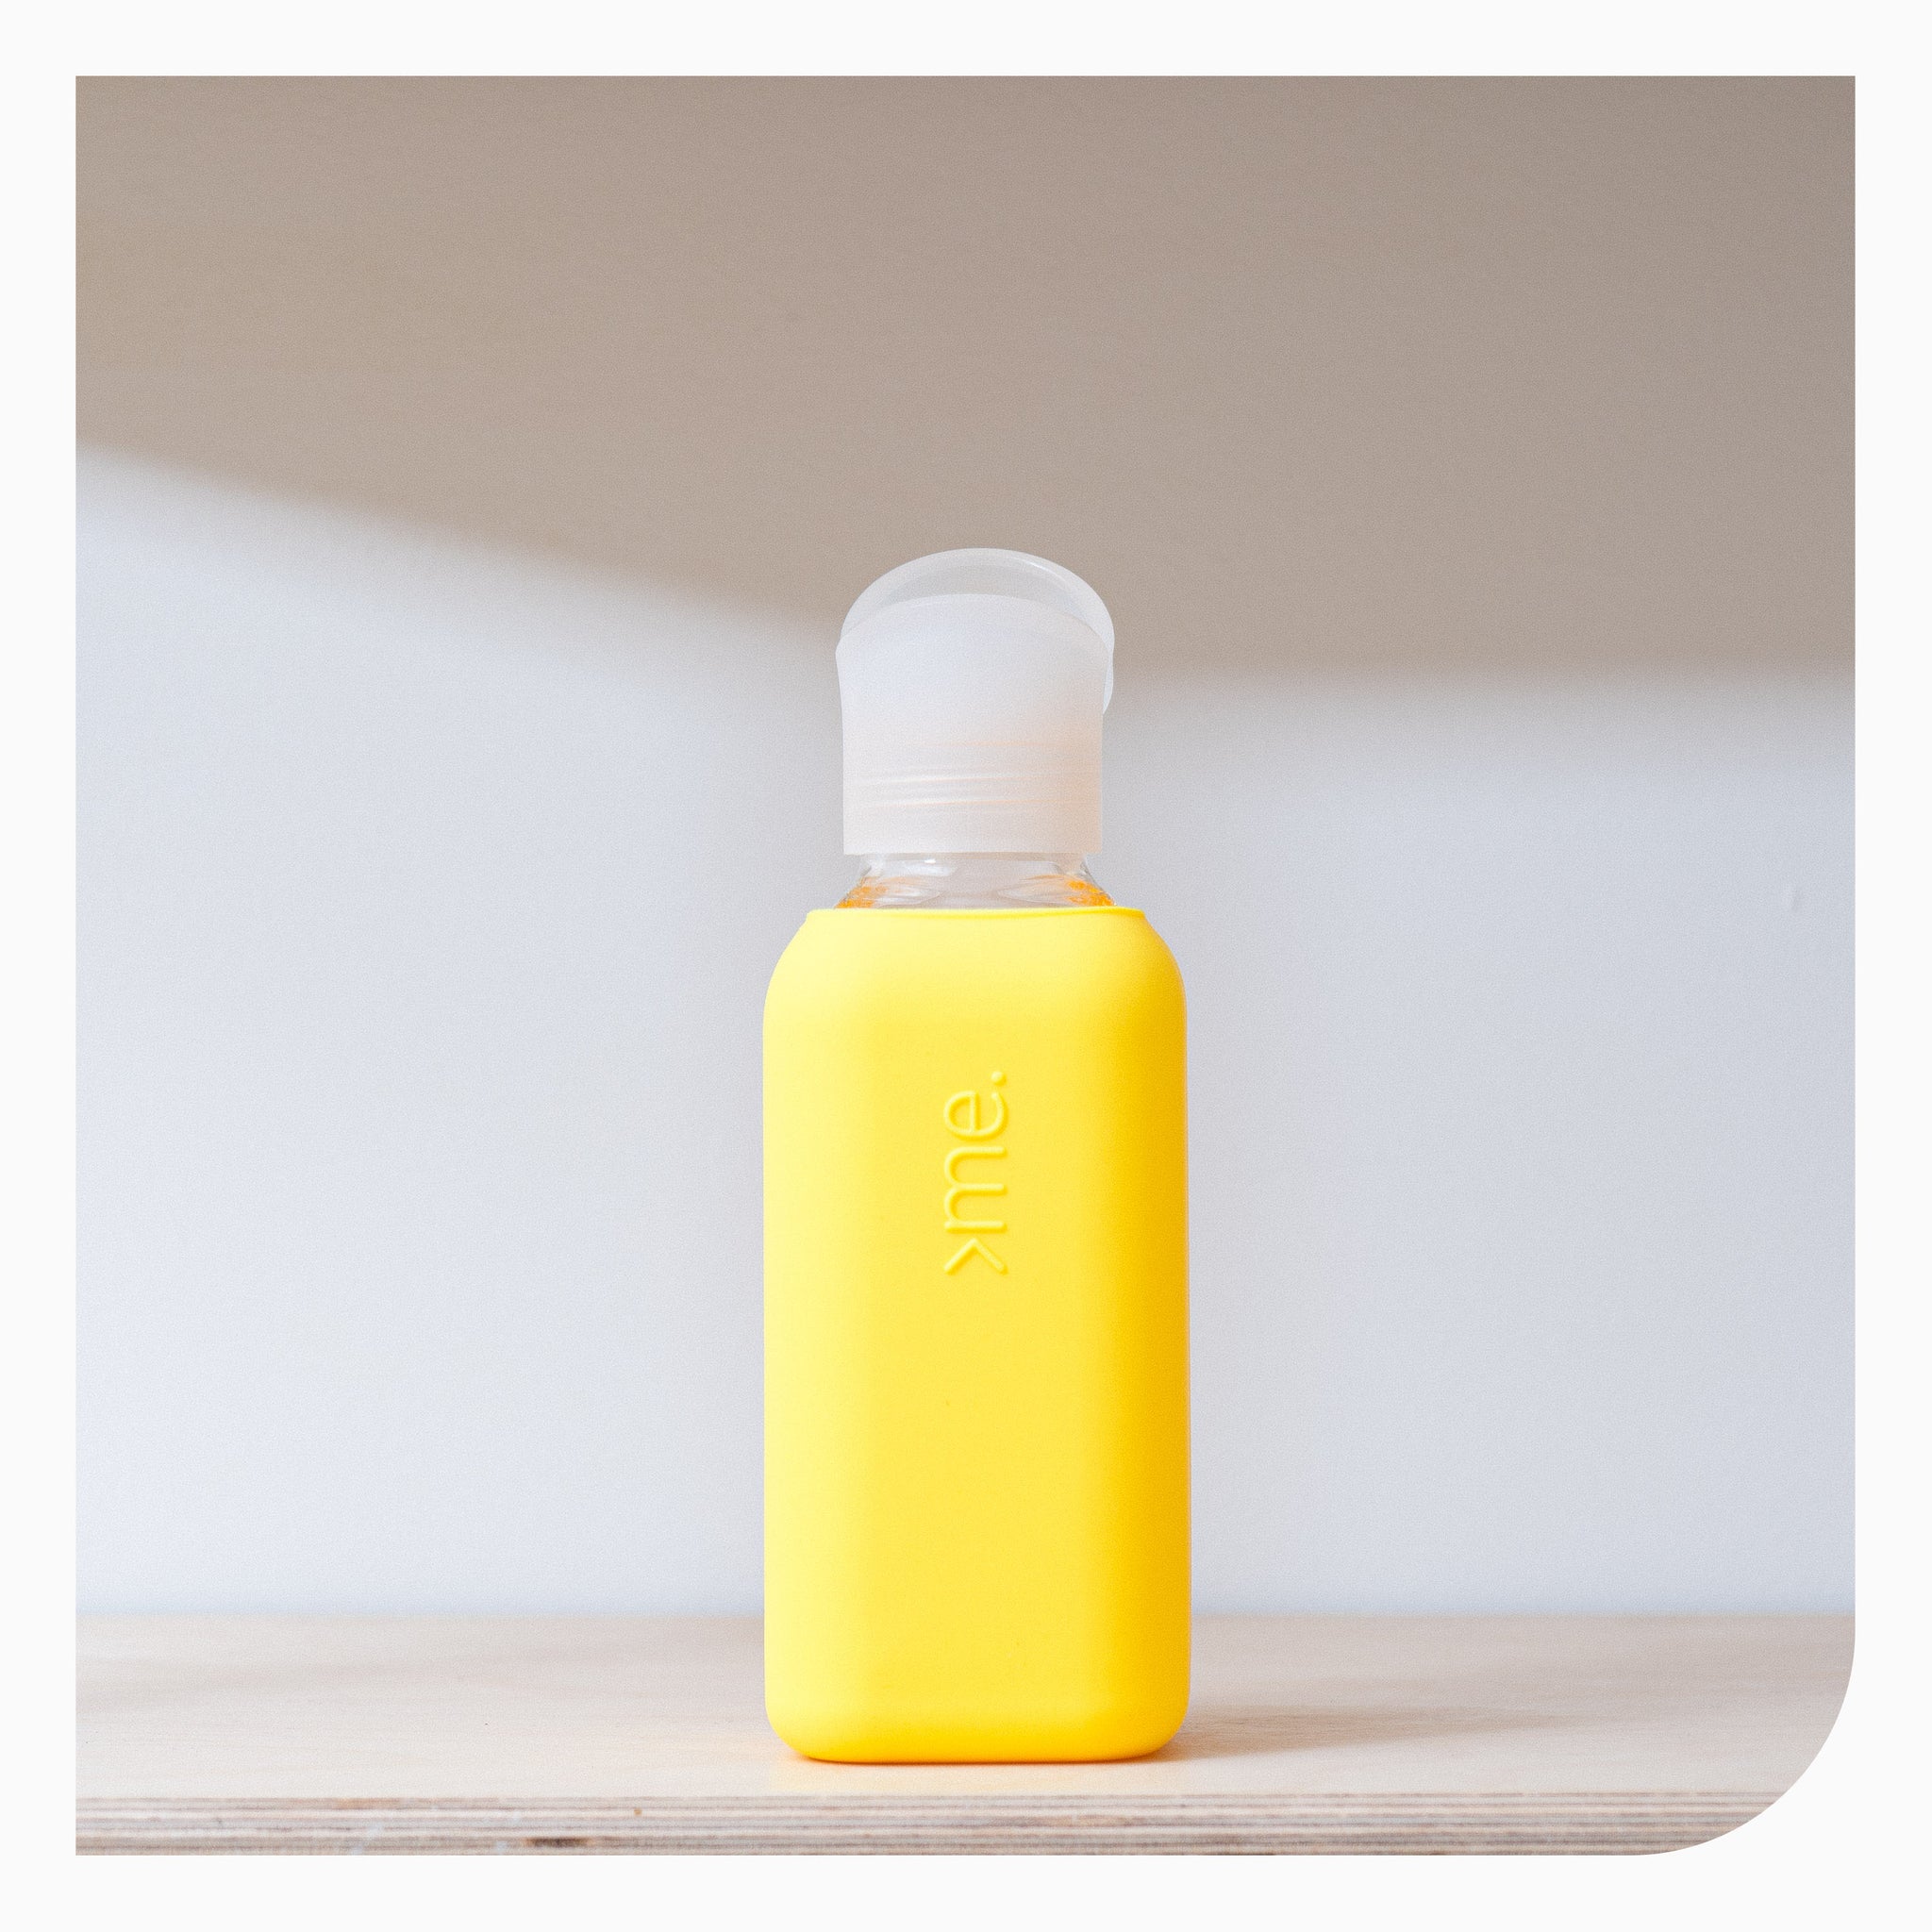 Squire Me Glass and Silicone Drinks Bottle - Yellow